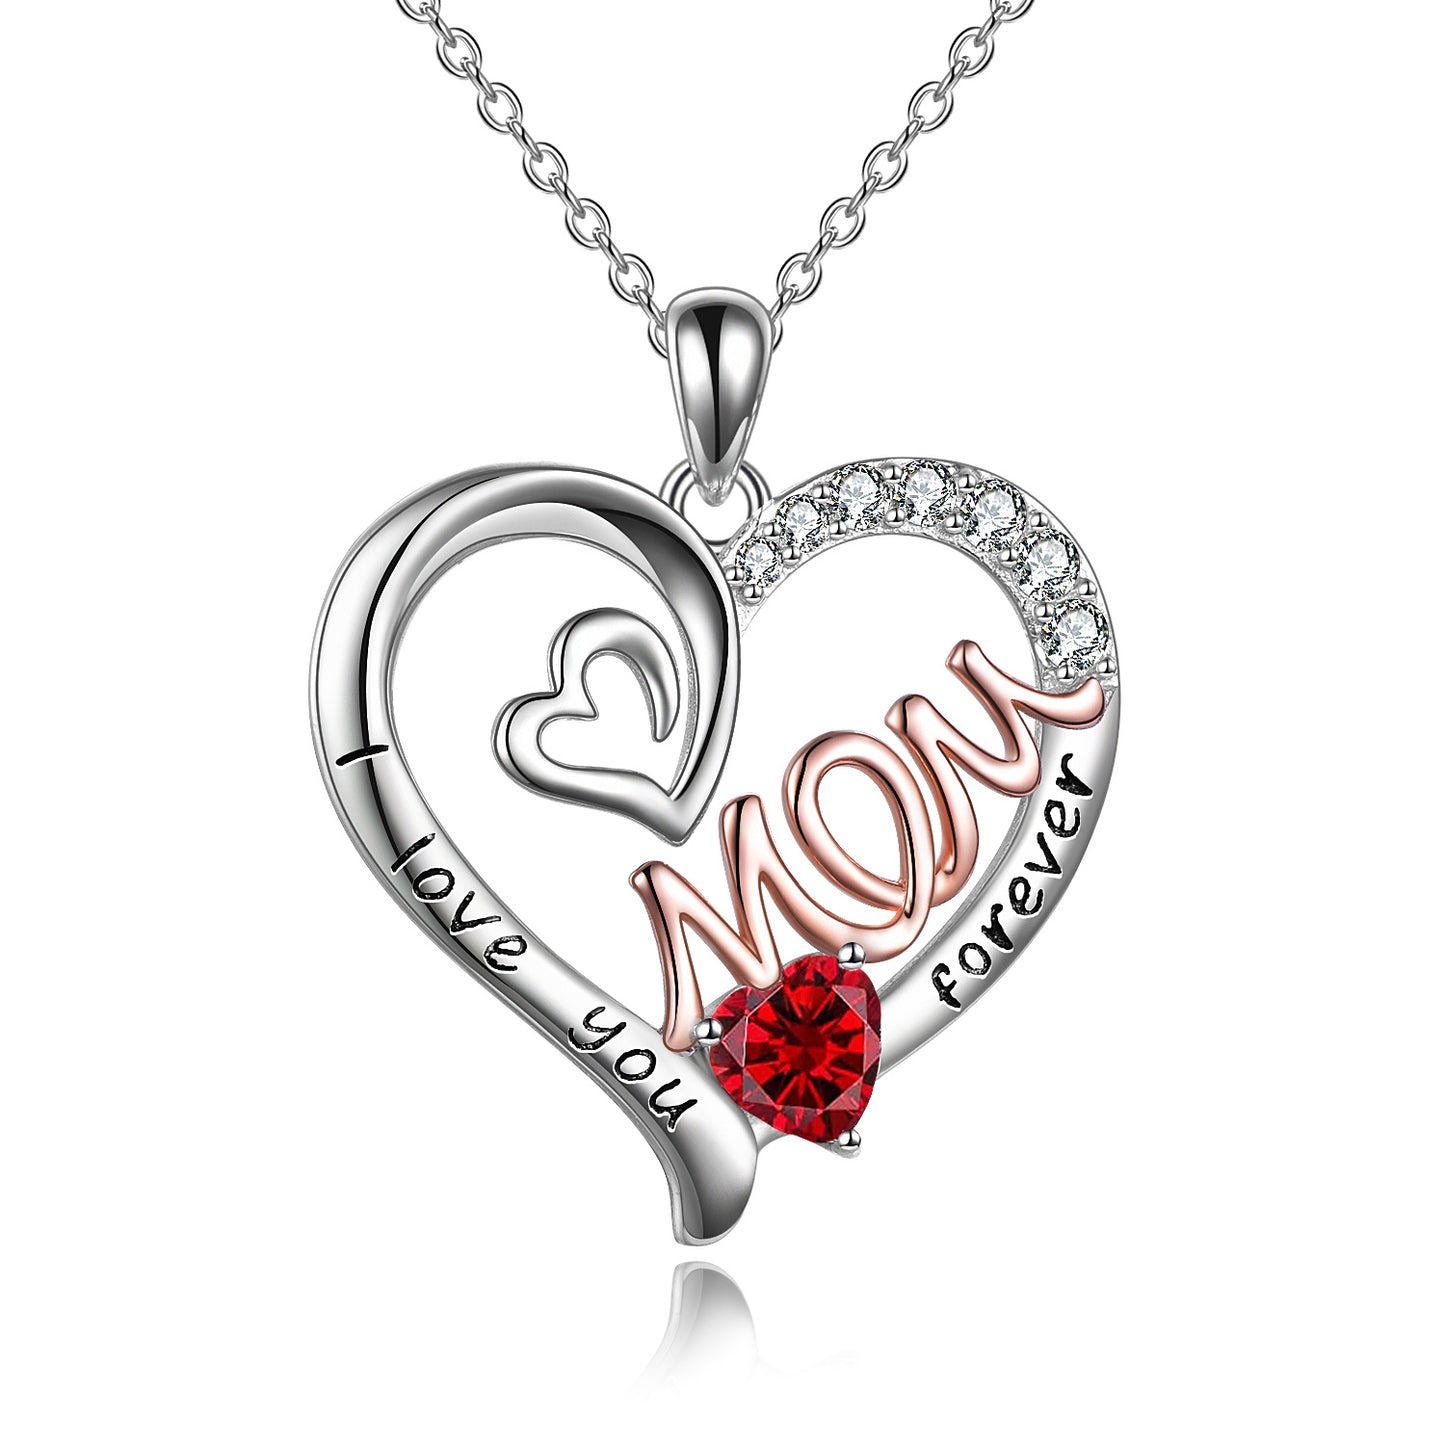 YFN Mom Necklace S925 Sterling Silver Heart CZ Pink Stone Love Mum Pendant Birthstone Jewelry for Women Mother Gifts (US only)